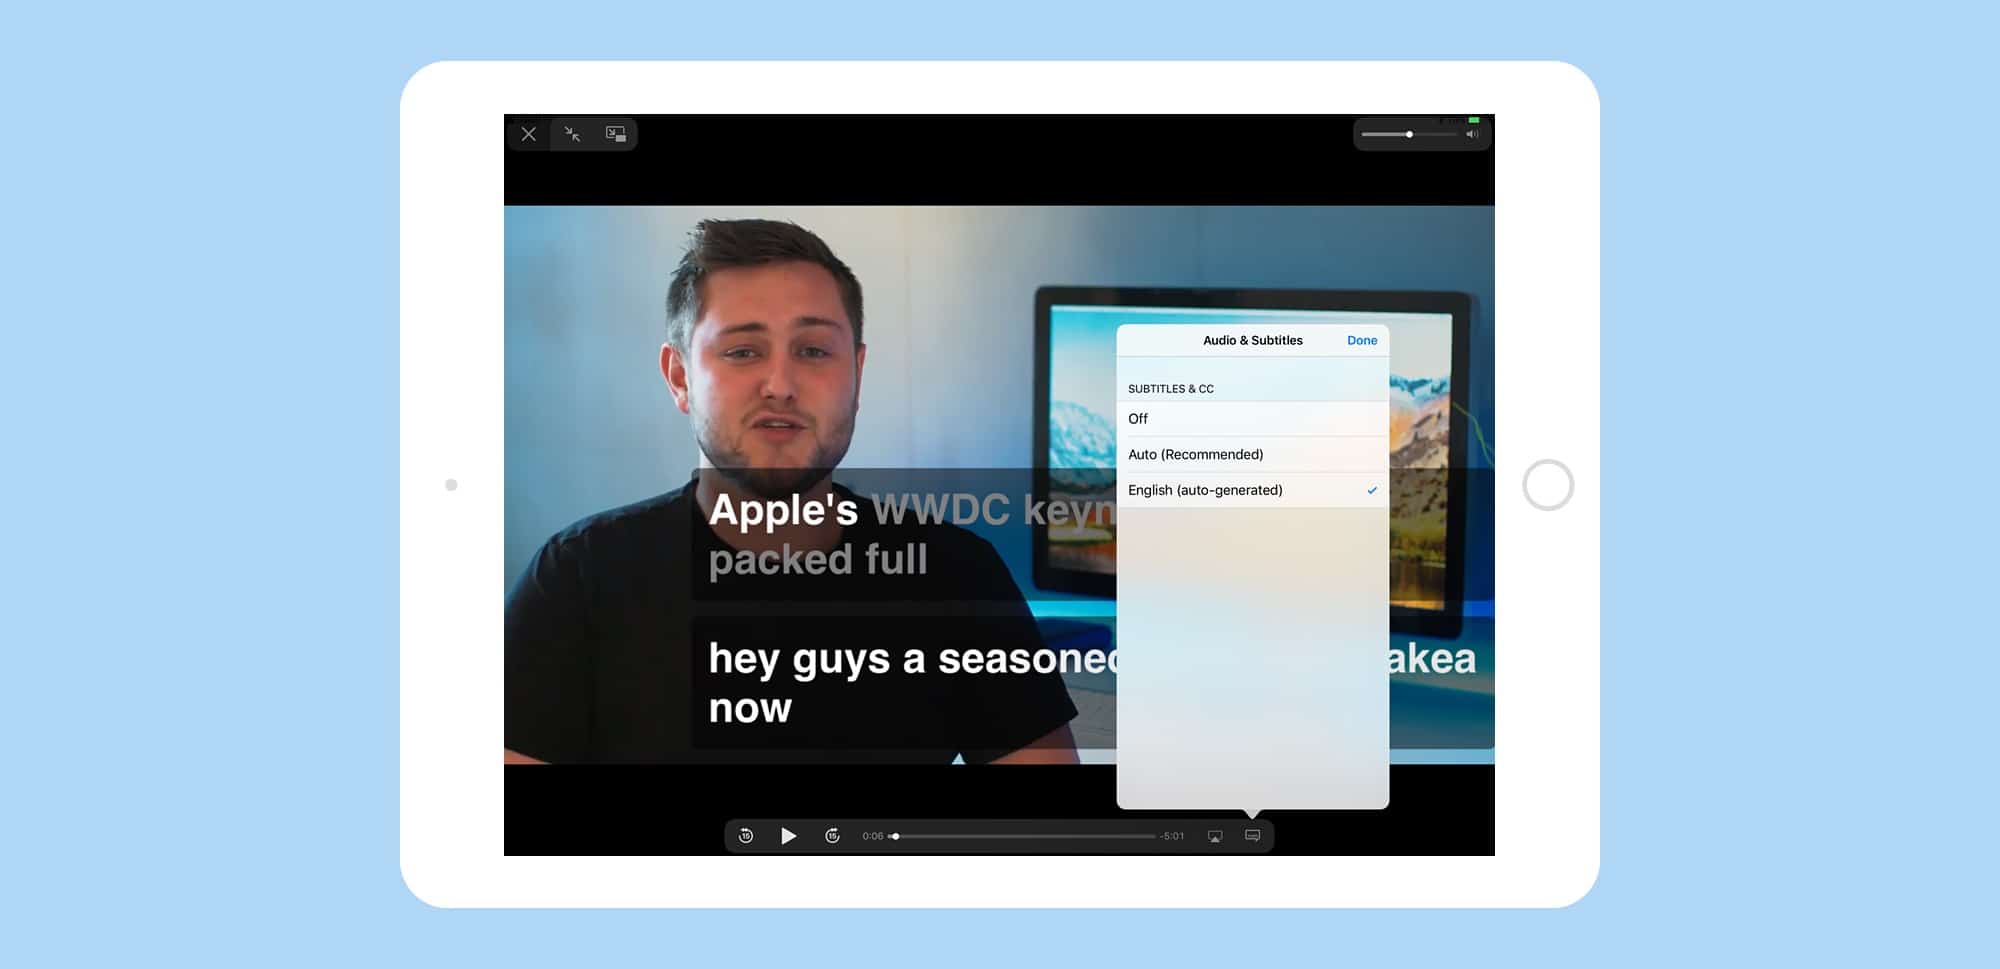 iOS 11 video player